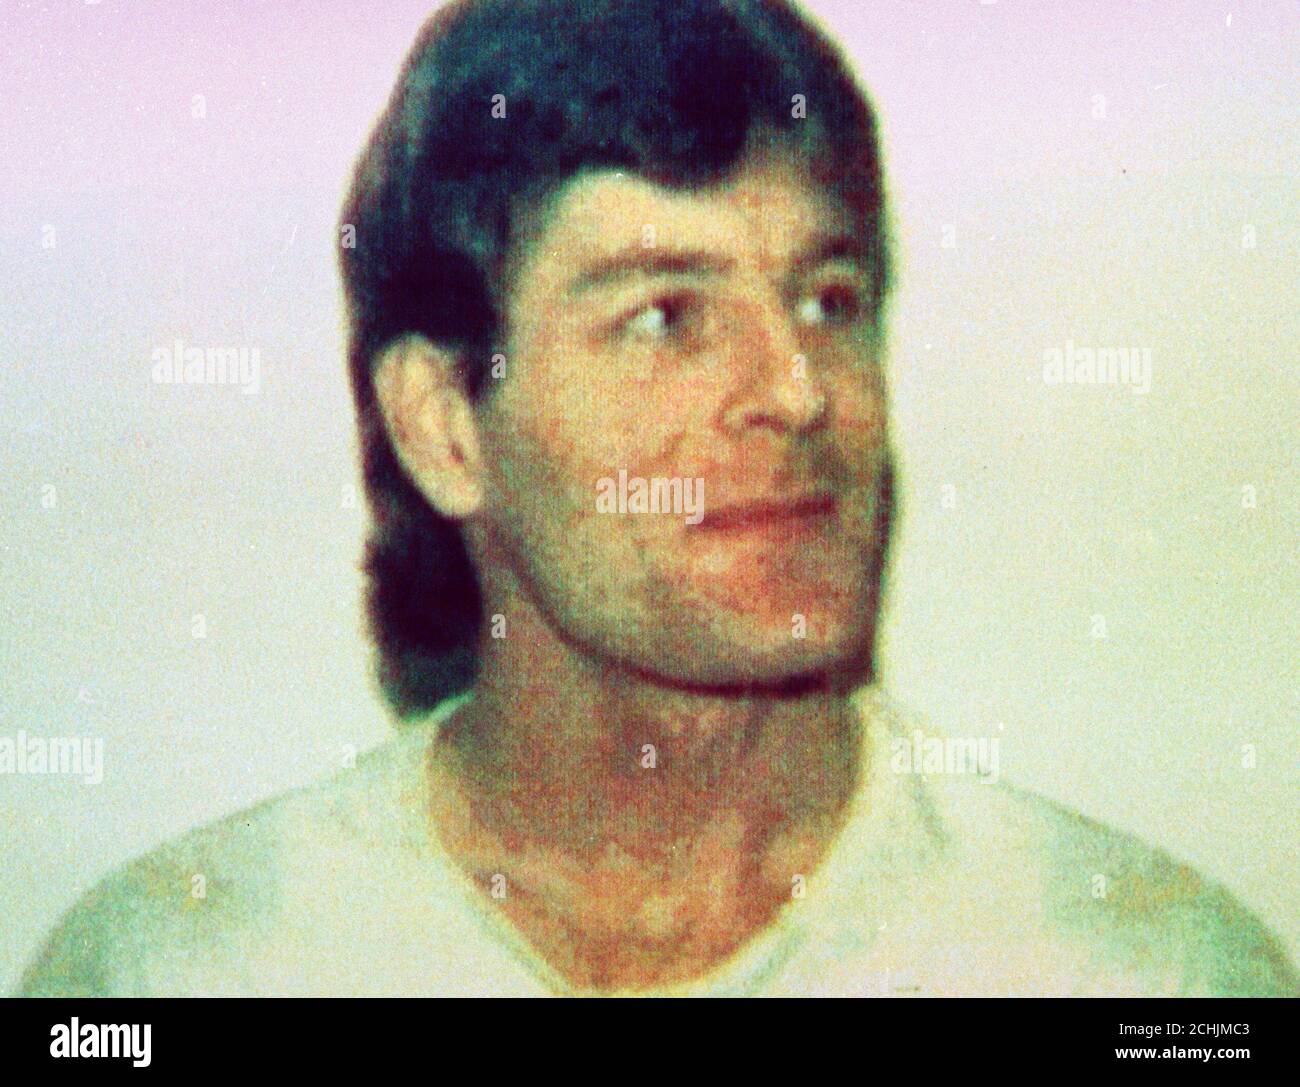 David Bond, 28, who was jailed for life at Nottingham Crown Court with a recommendation that he serve at least 40 years for the killing of Debbie Buxton, 35, in April 1993. Stock Photo